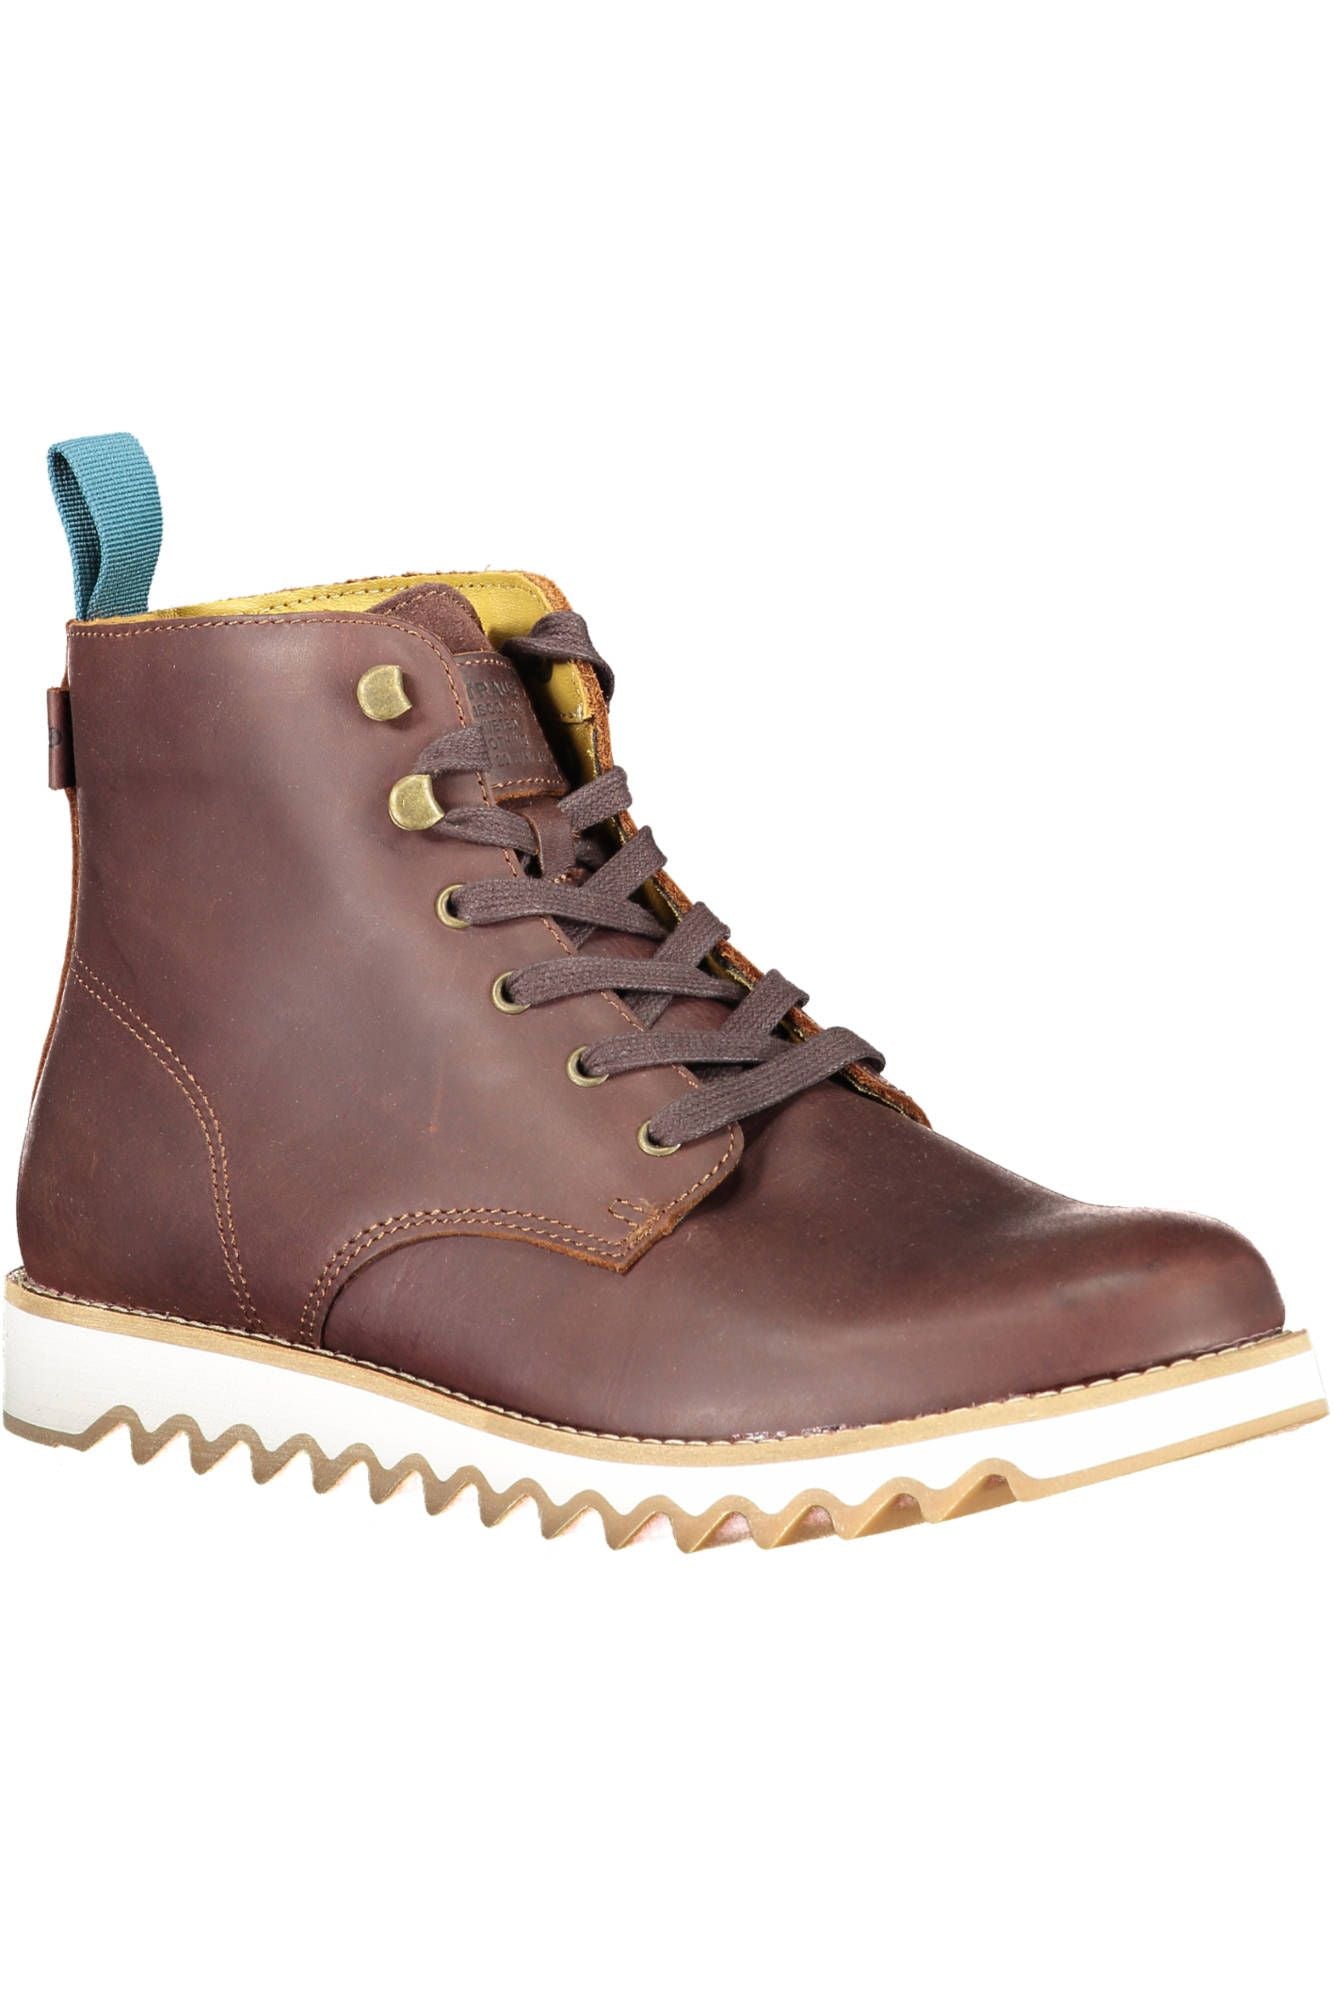 Elevated Brown Ankle Lace-Up Boots with Contrasting Sole - Divitiae Glamour